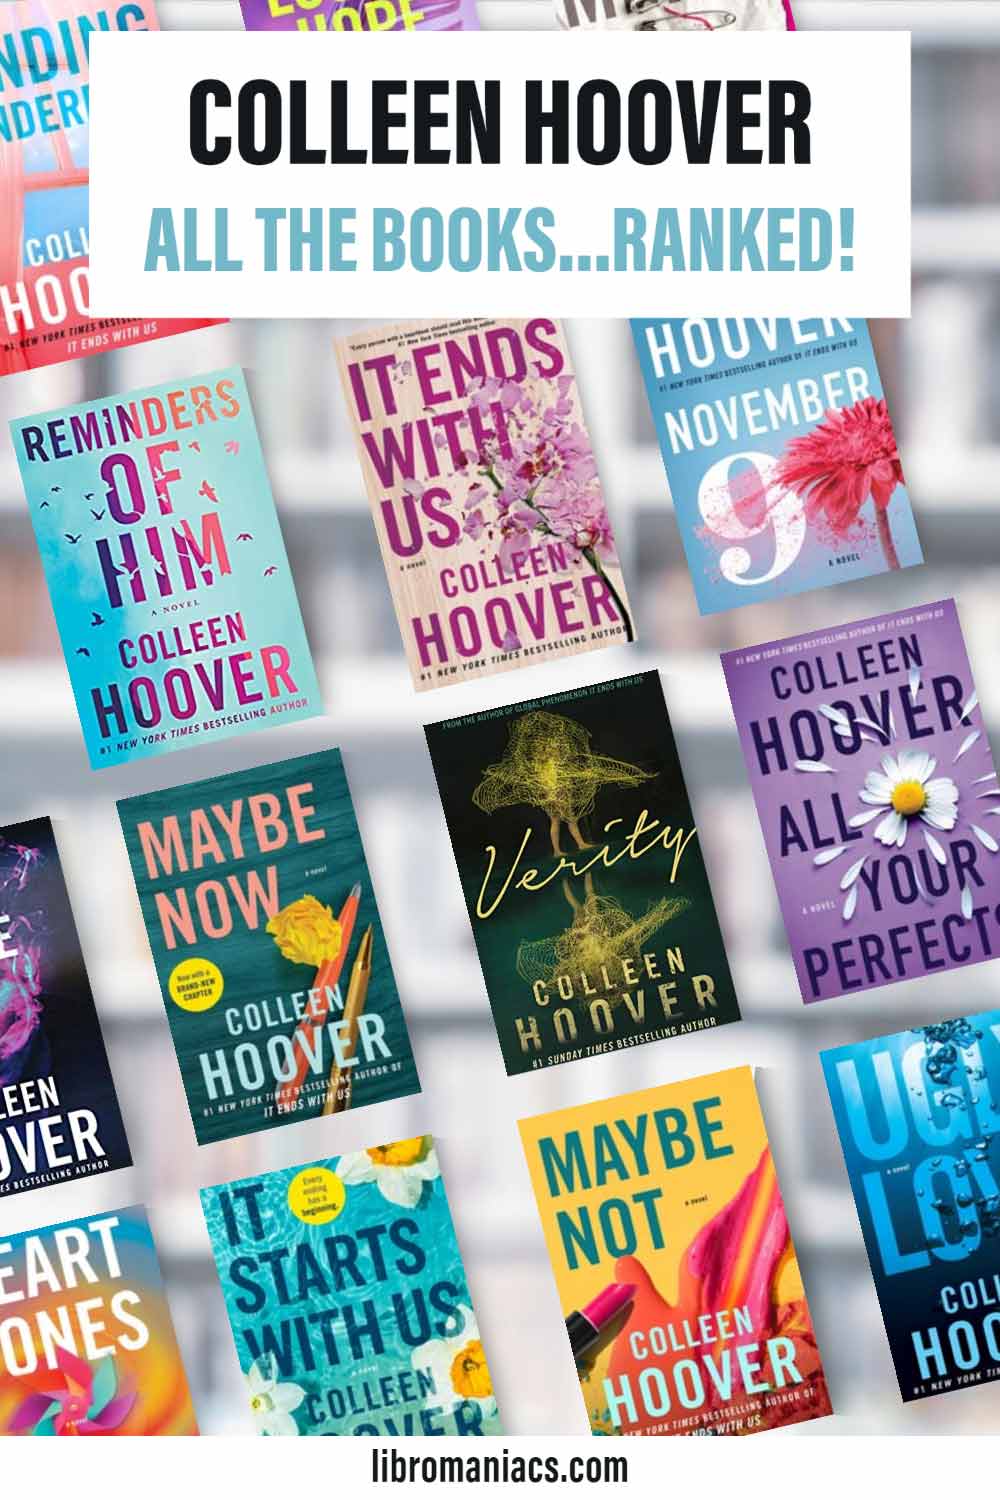 Colleen Hoover books, ranked and rated, with book covers. 